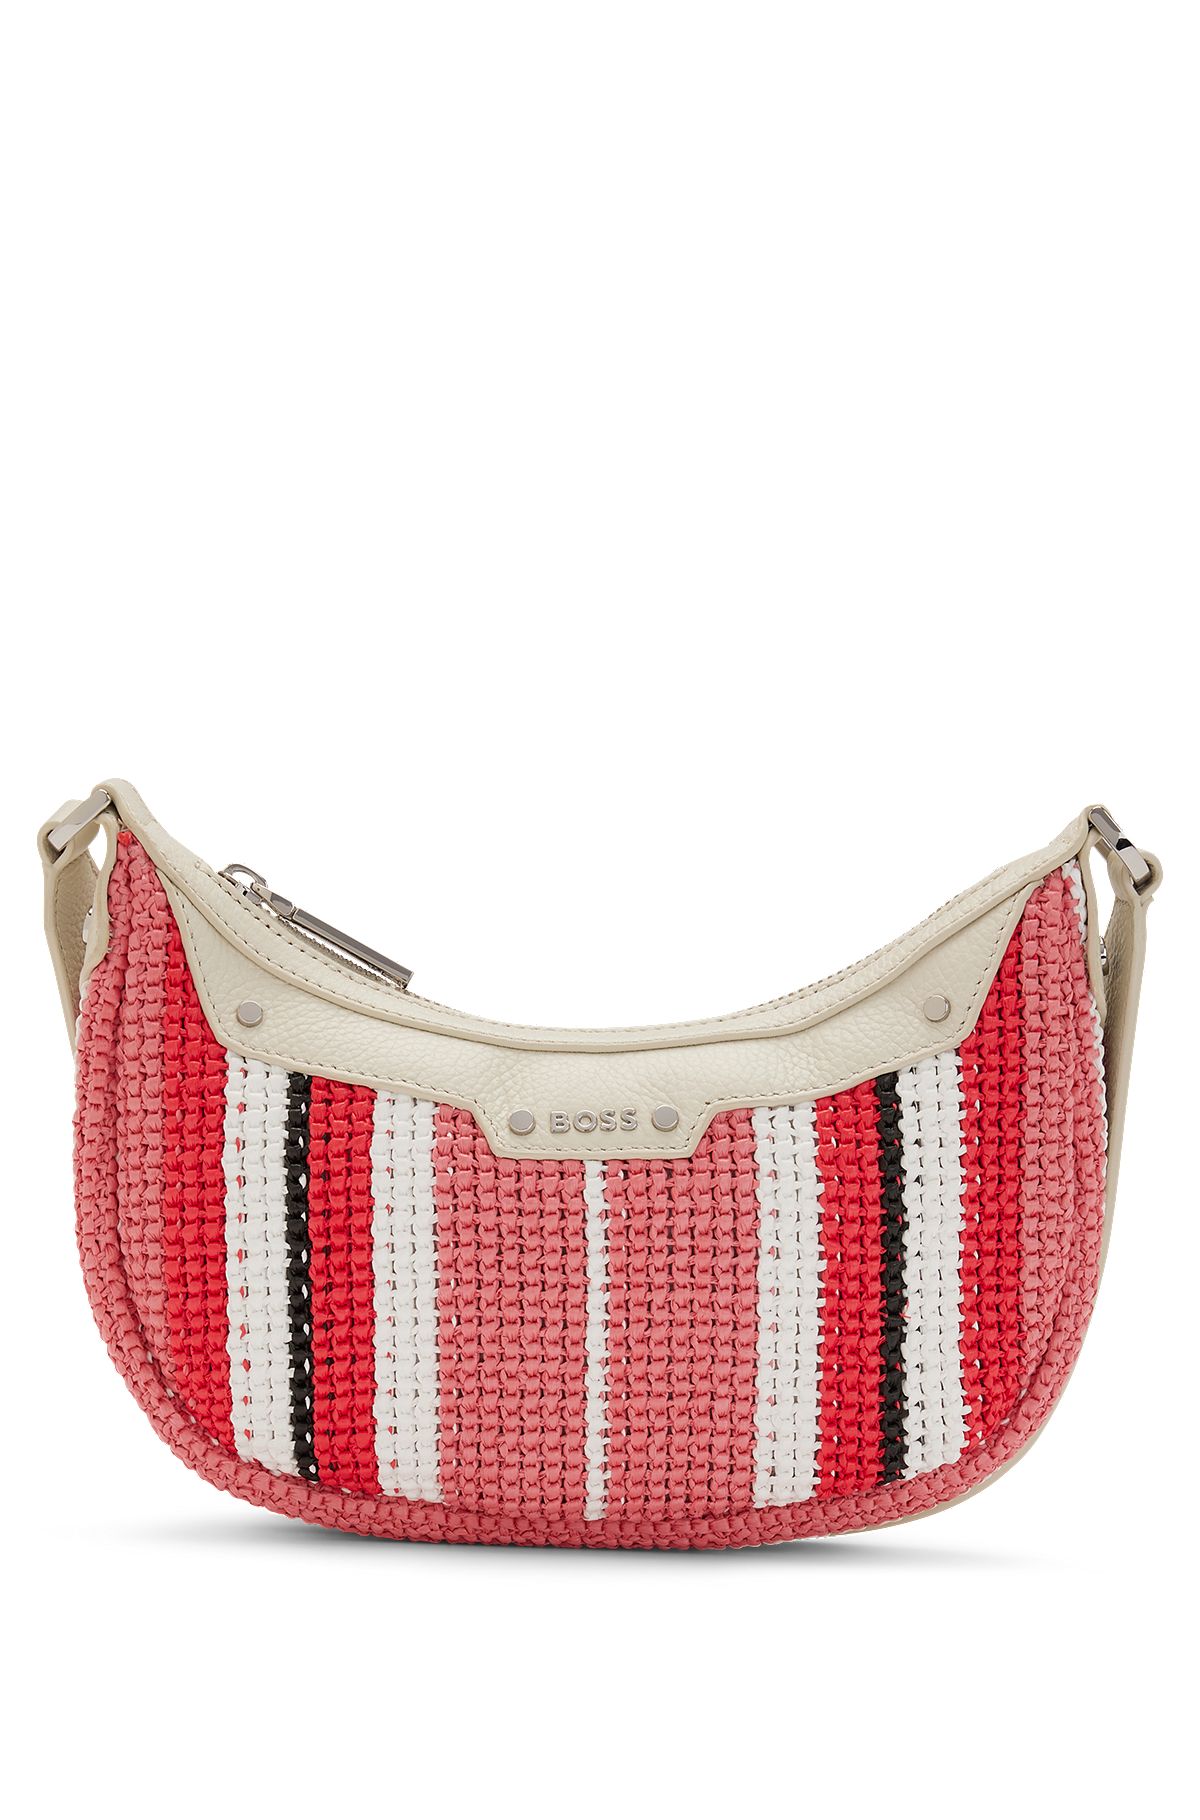 Leather-trimmed crossbody bag in multi-coloured raffia, Pink